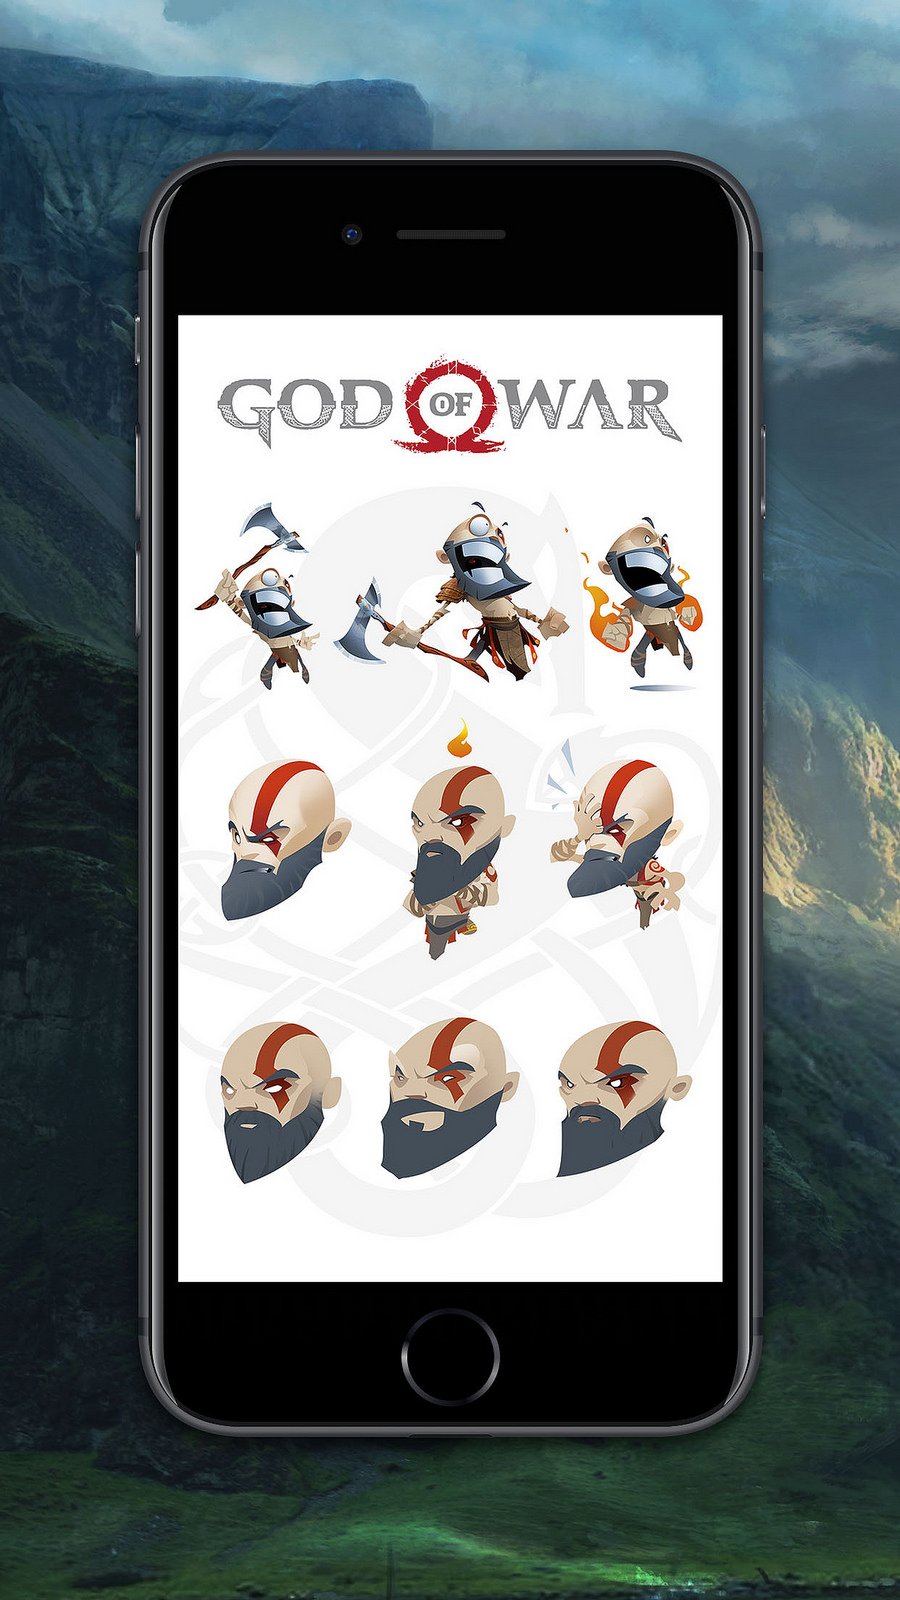 God-of-War-stickers-mobiles-01-09-05-2018